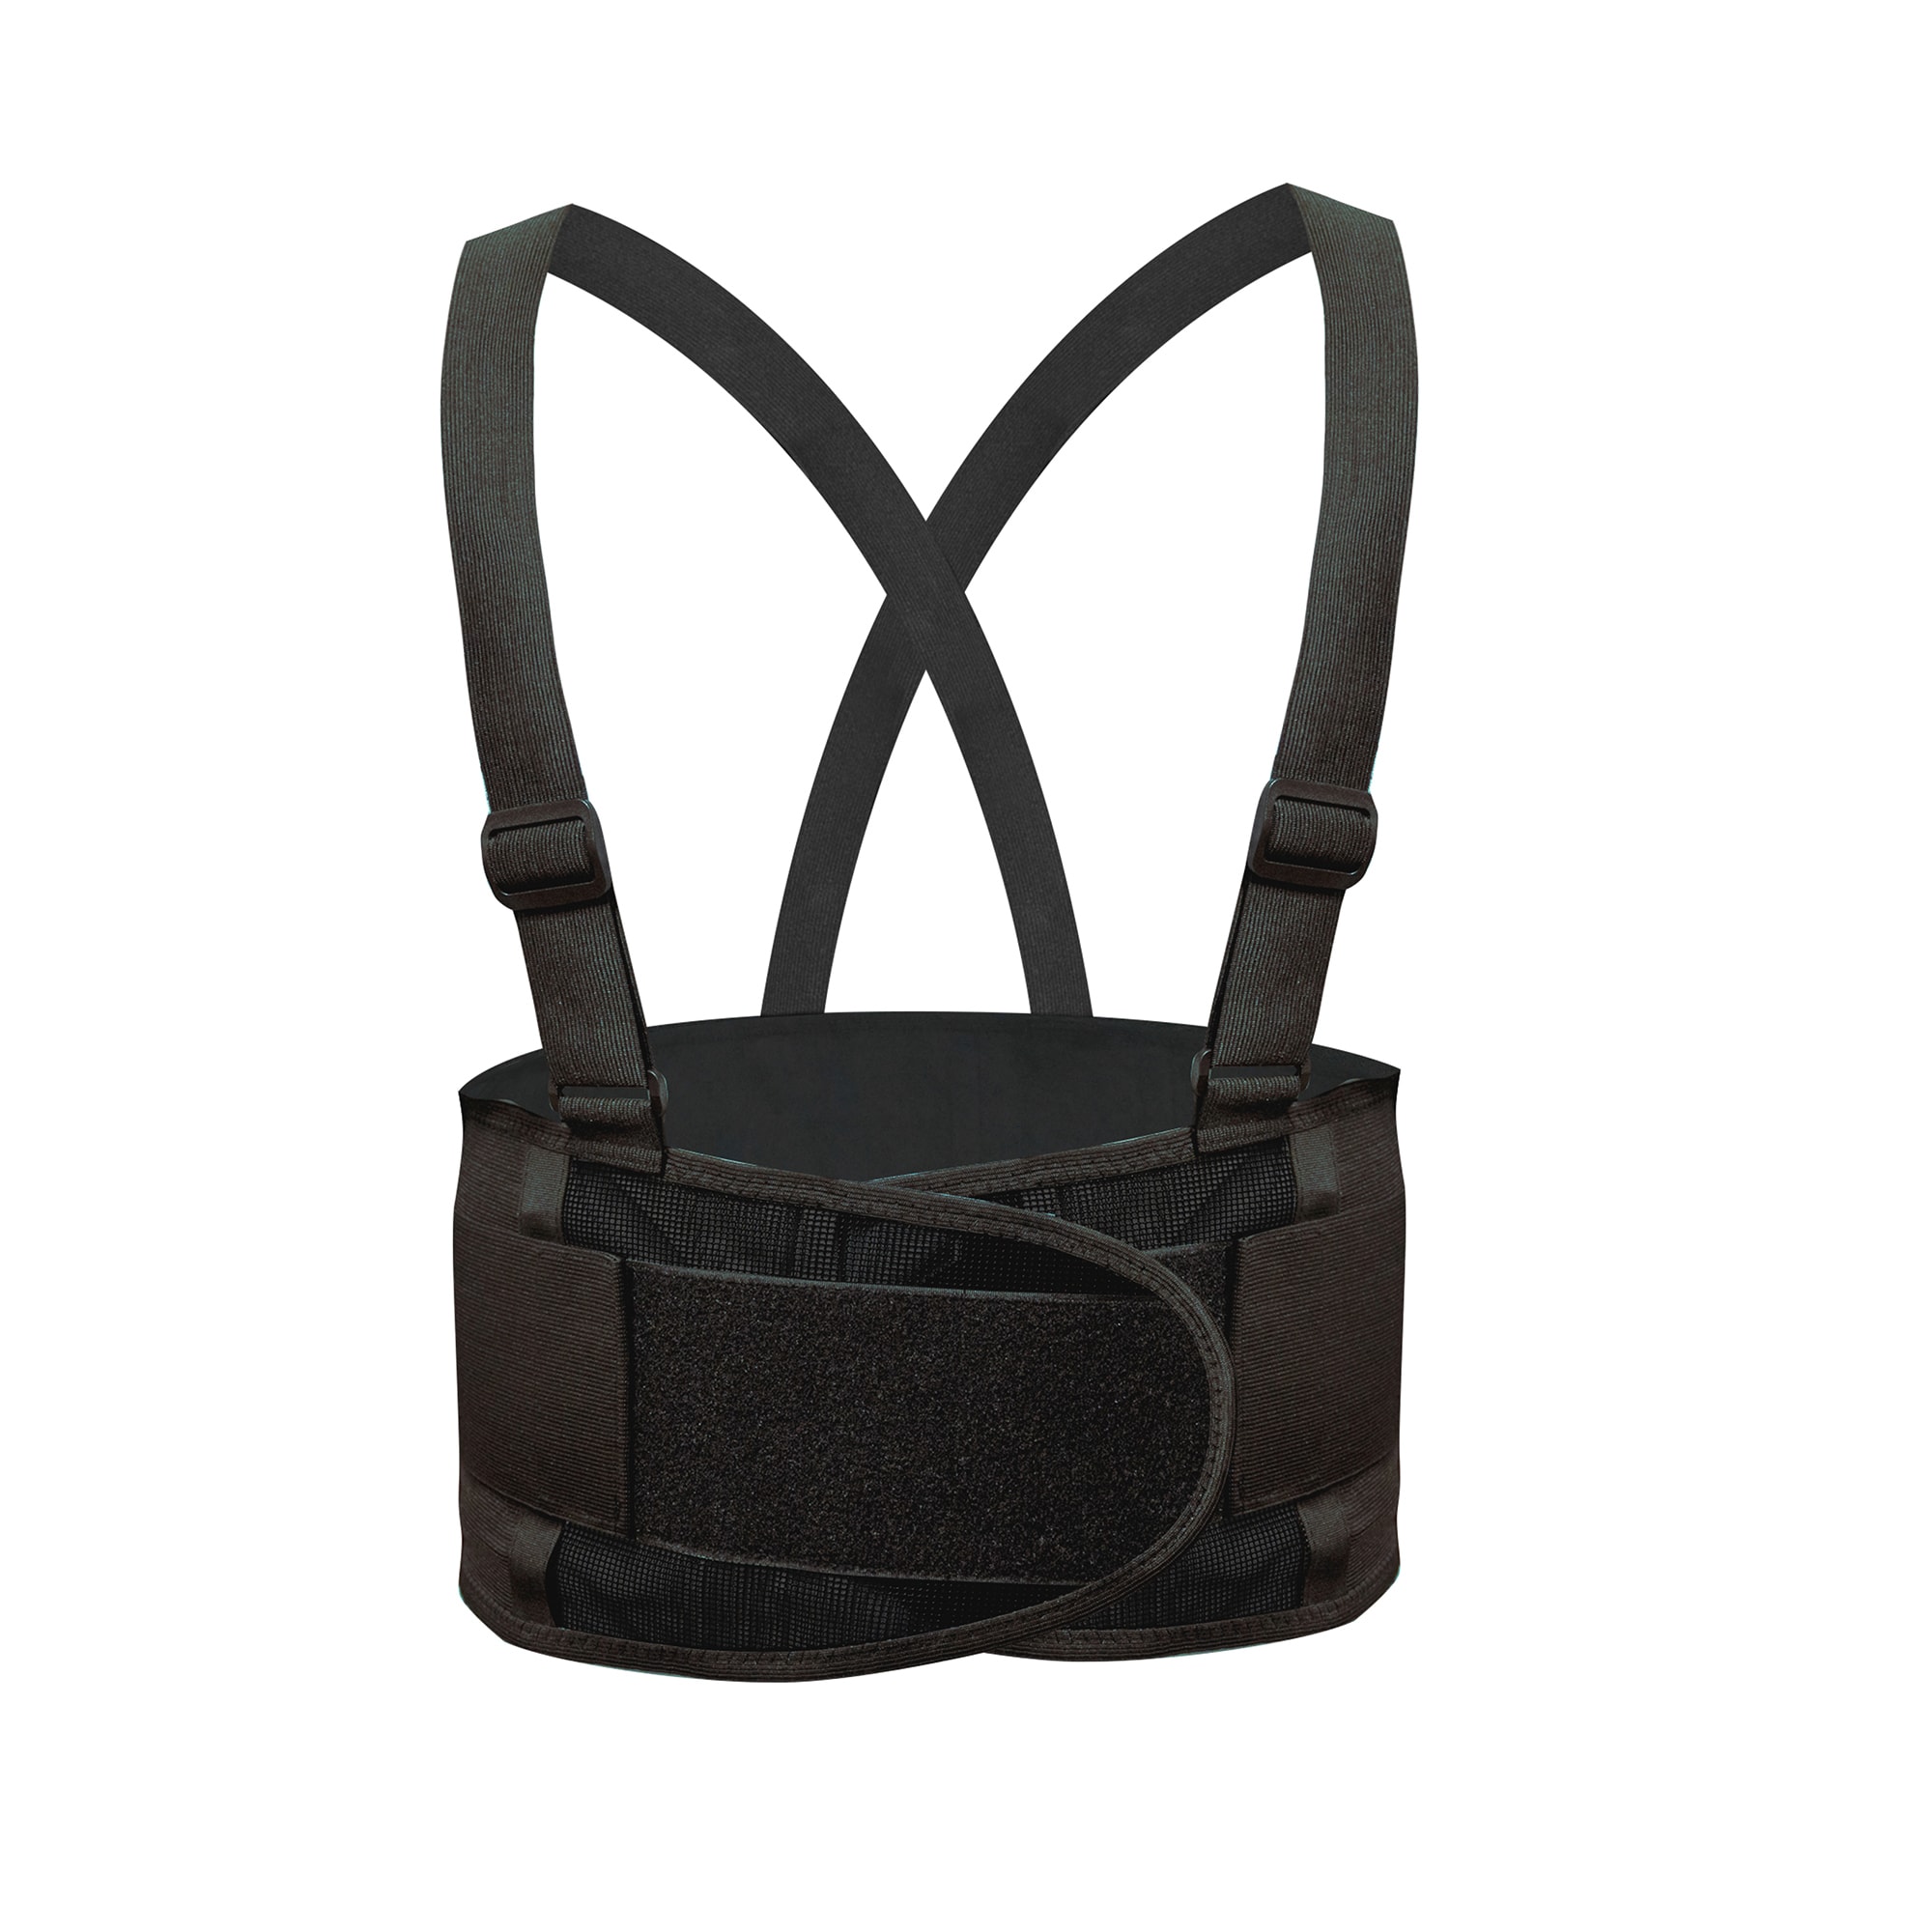 BACK SUPPORT-BLACK W/SUSPENDERS OSFM, Back Support Braces, By Body Part, Open Catalog